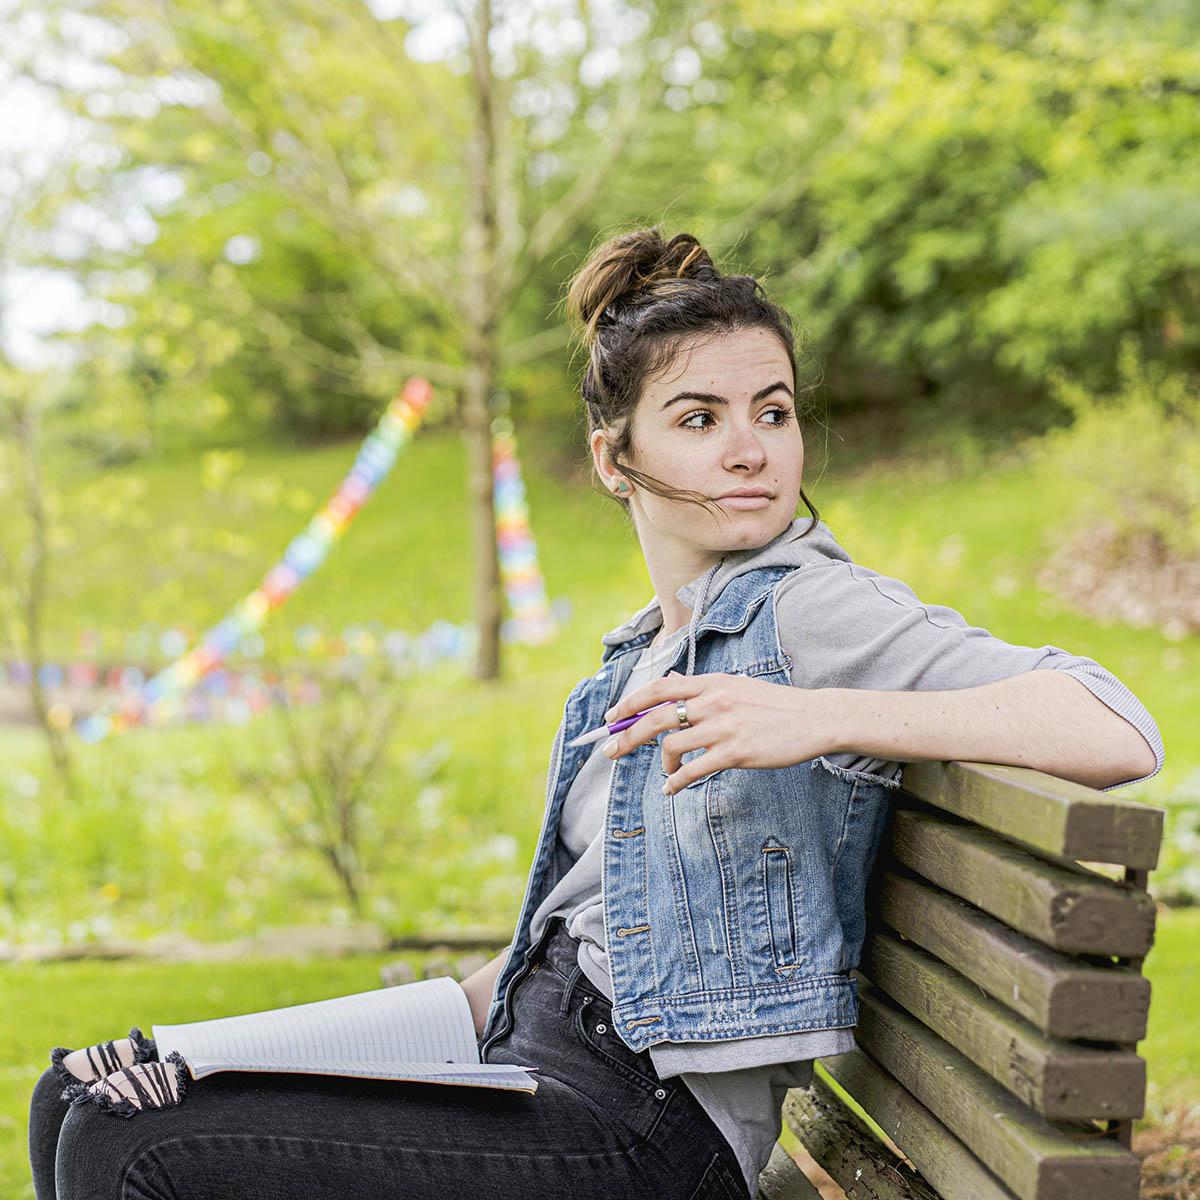 Photo of a young white woman with hair tied up, wearing a jean jacket 和 seated on a bench outside looking behind her into the distance